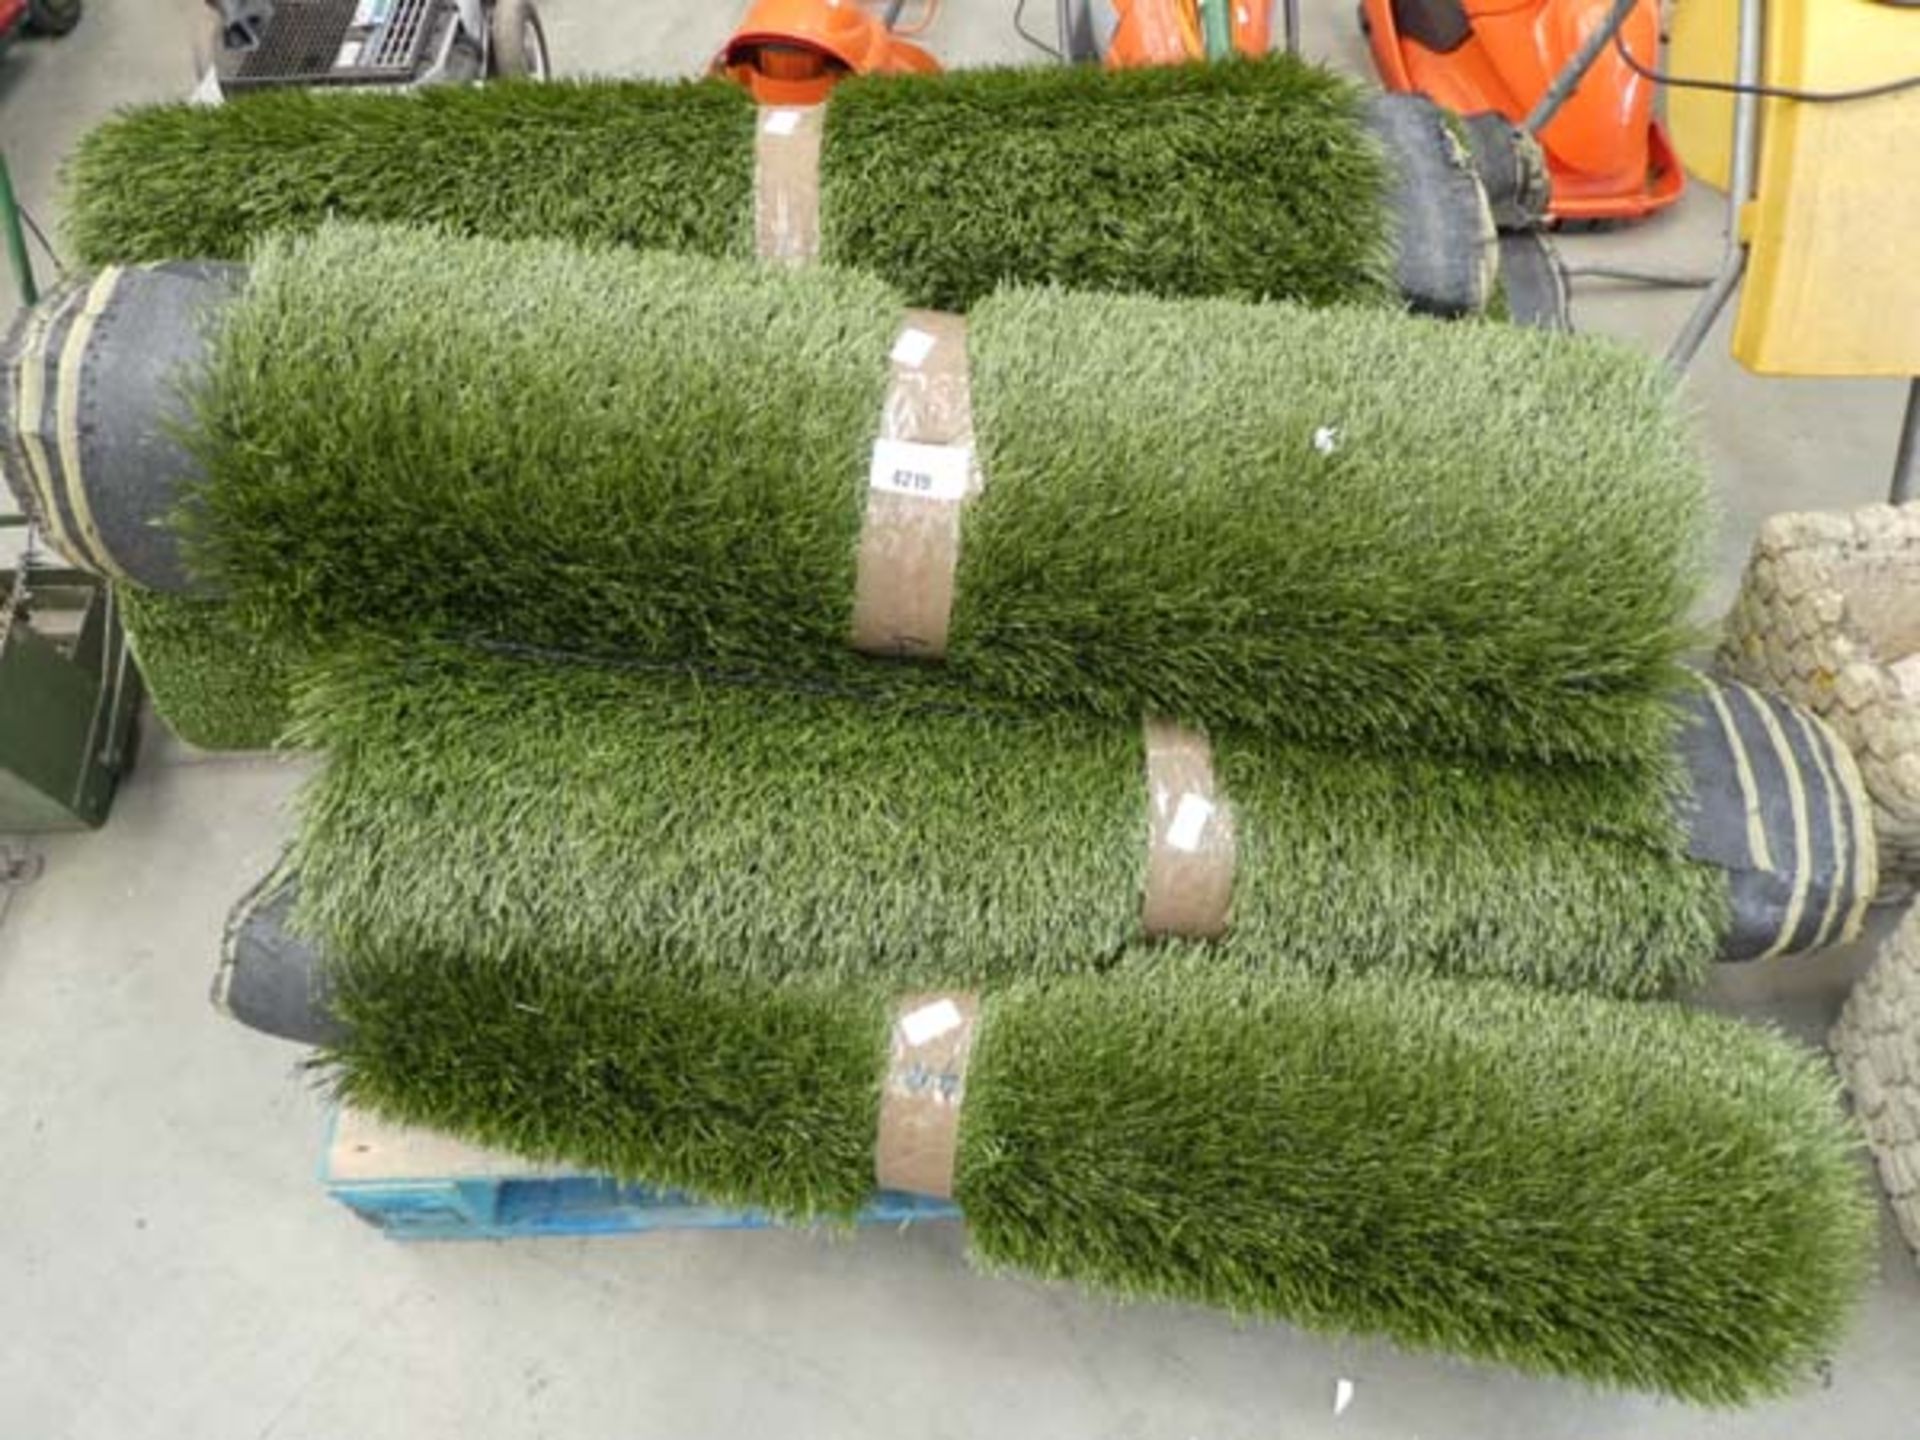 Seven small rolls of assorted astro turf